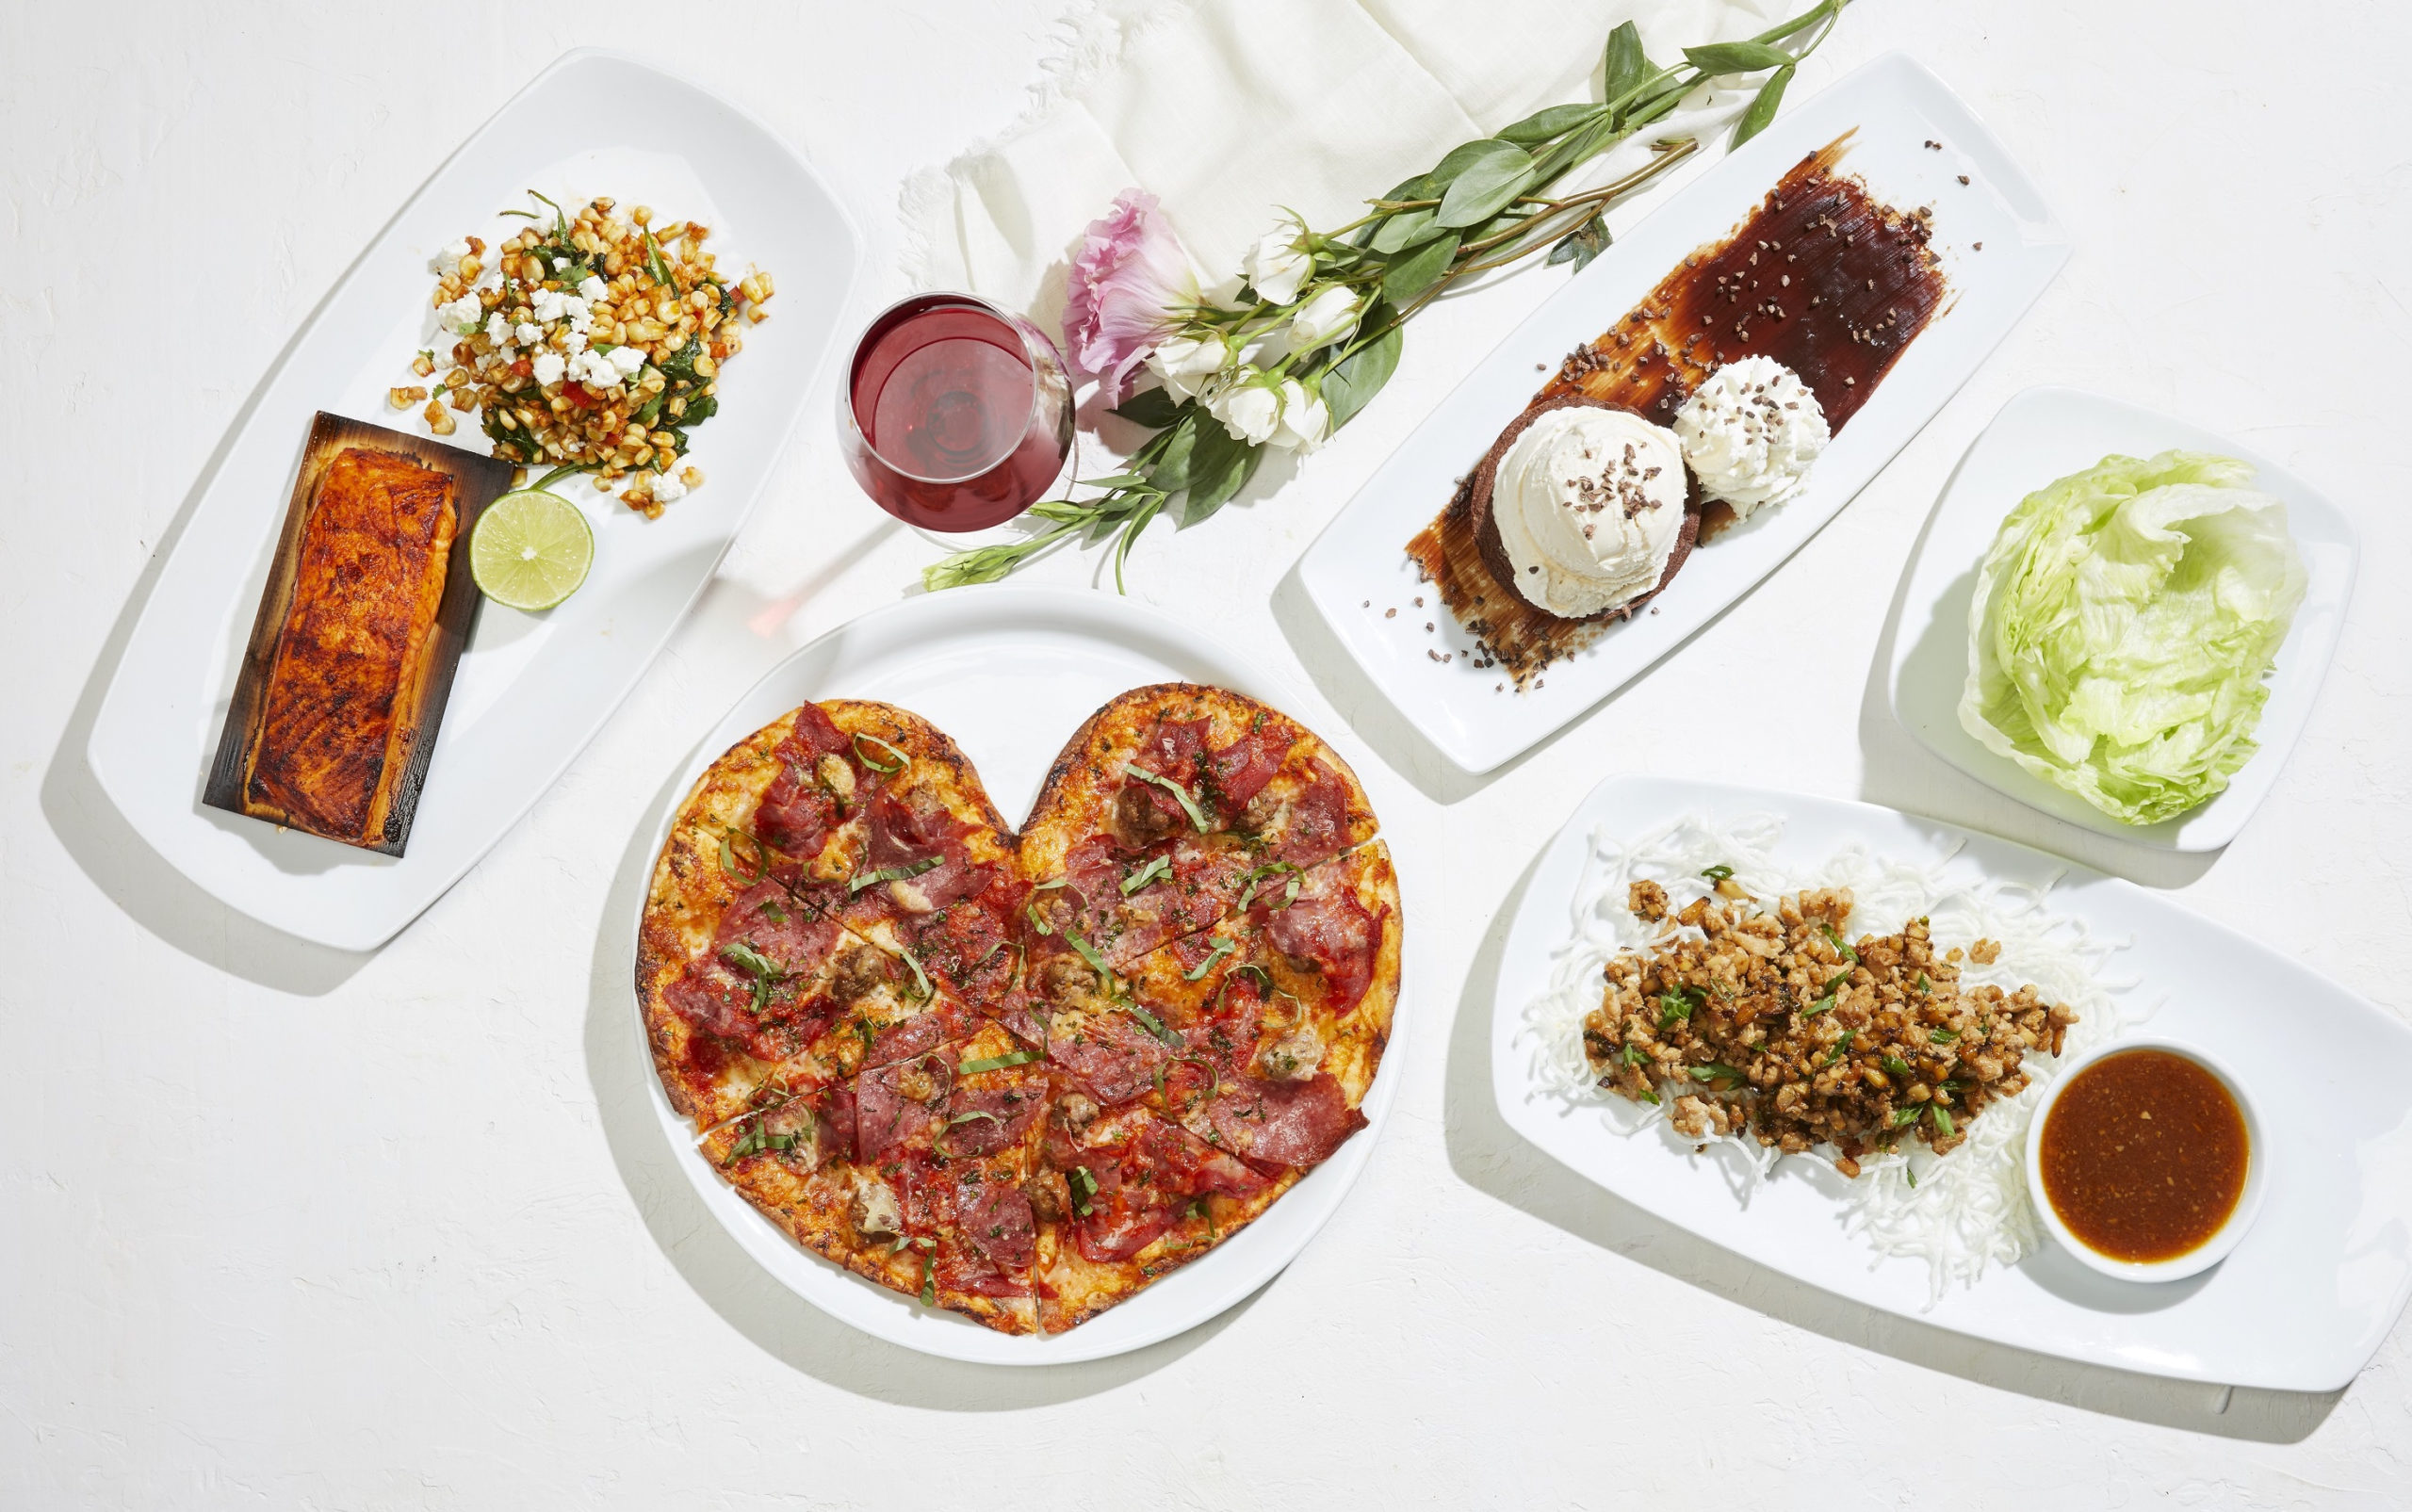 Valentine’s Day food offers